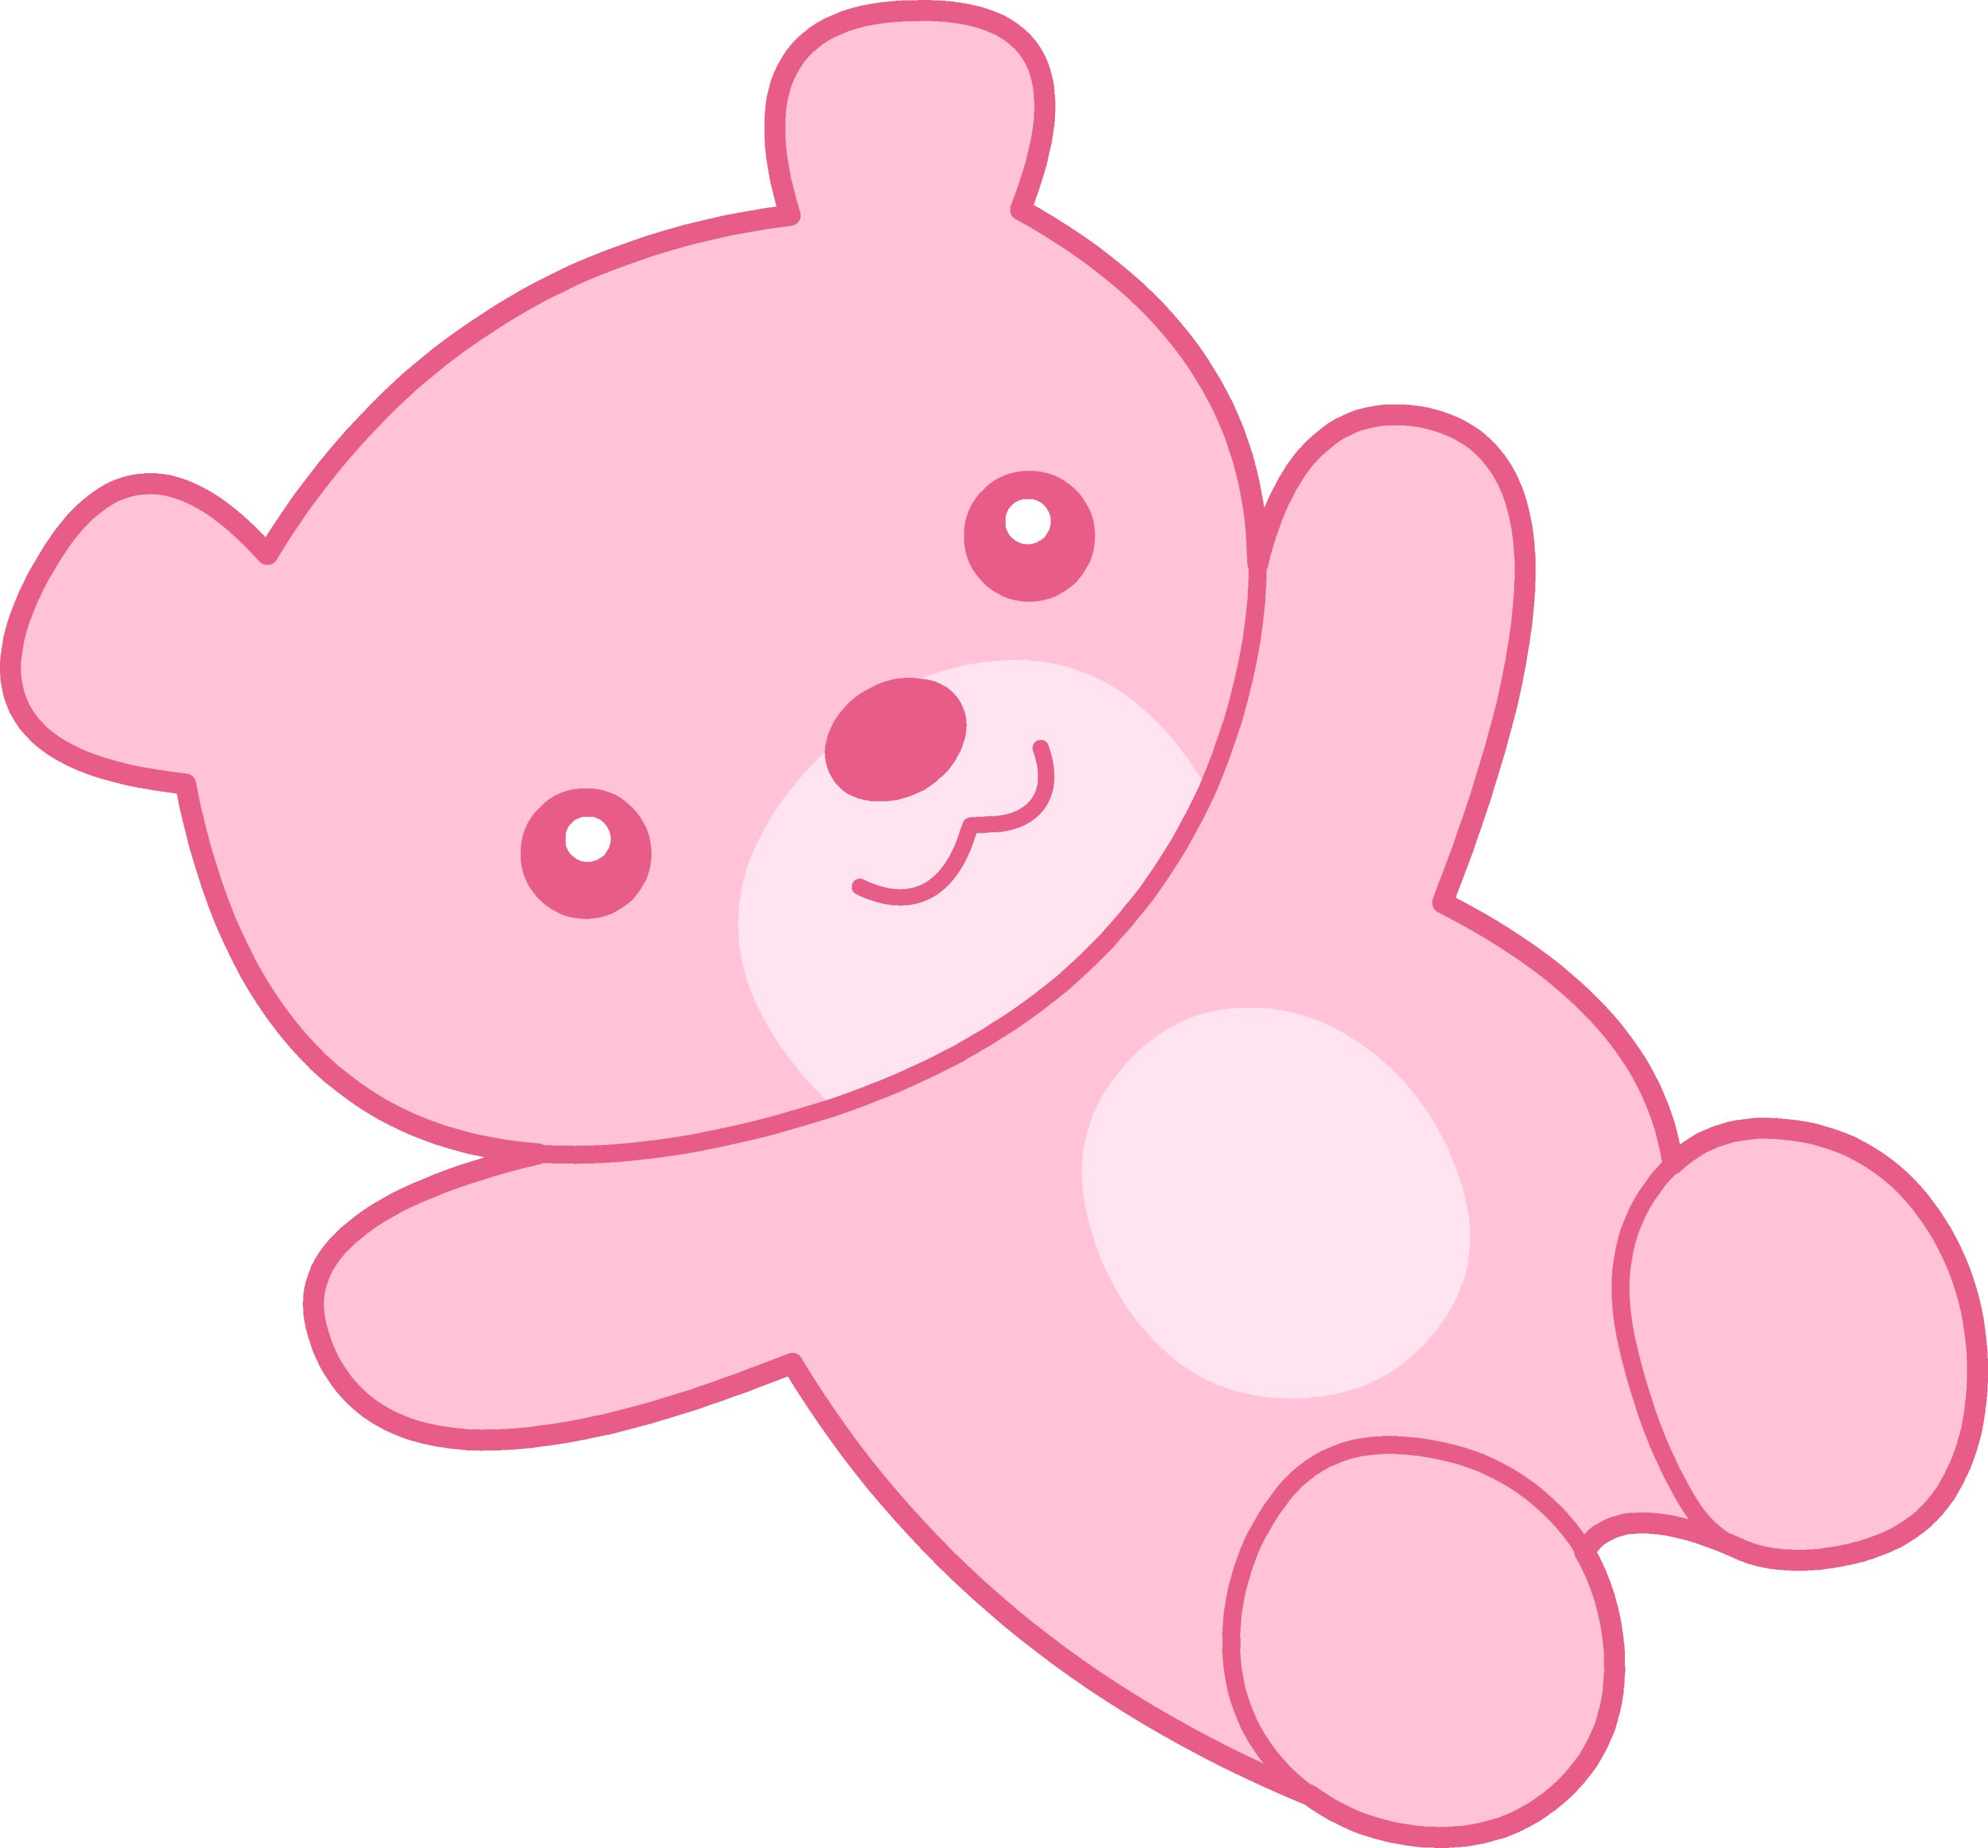 clipart pictures of teddy bears - photo #49